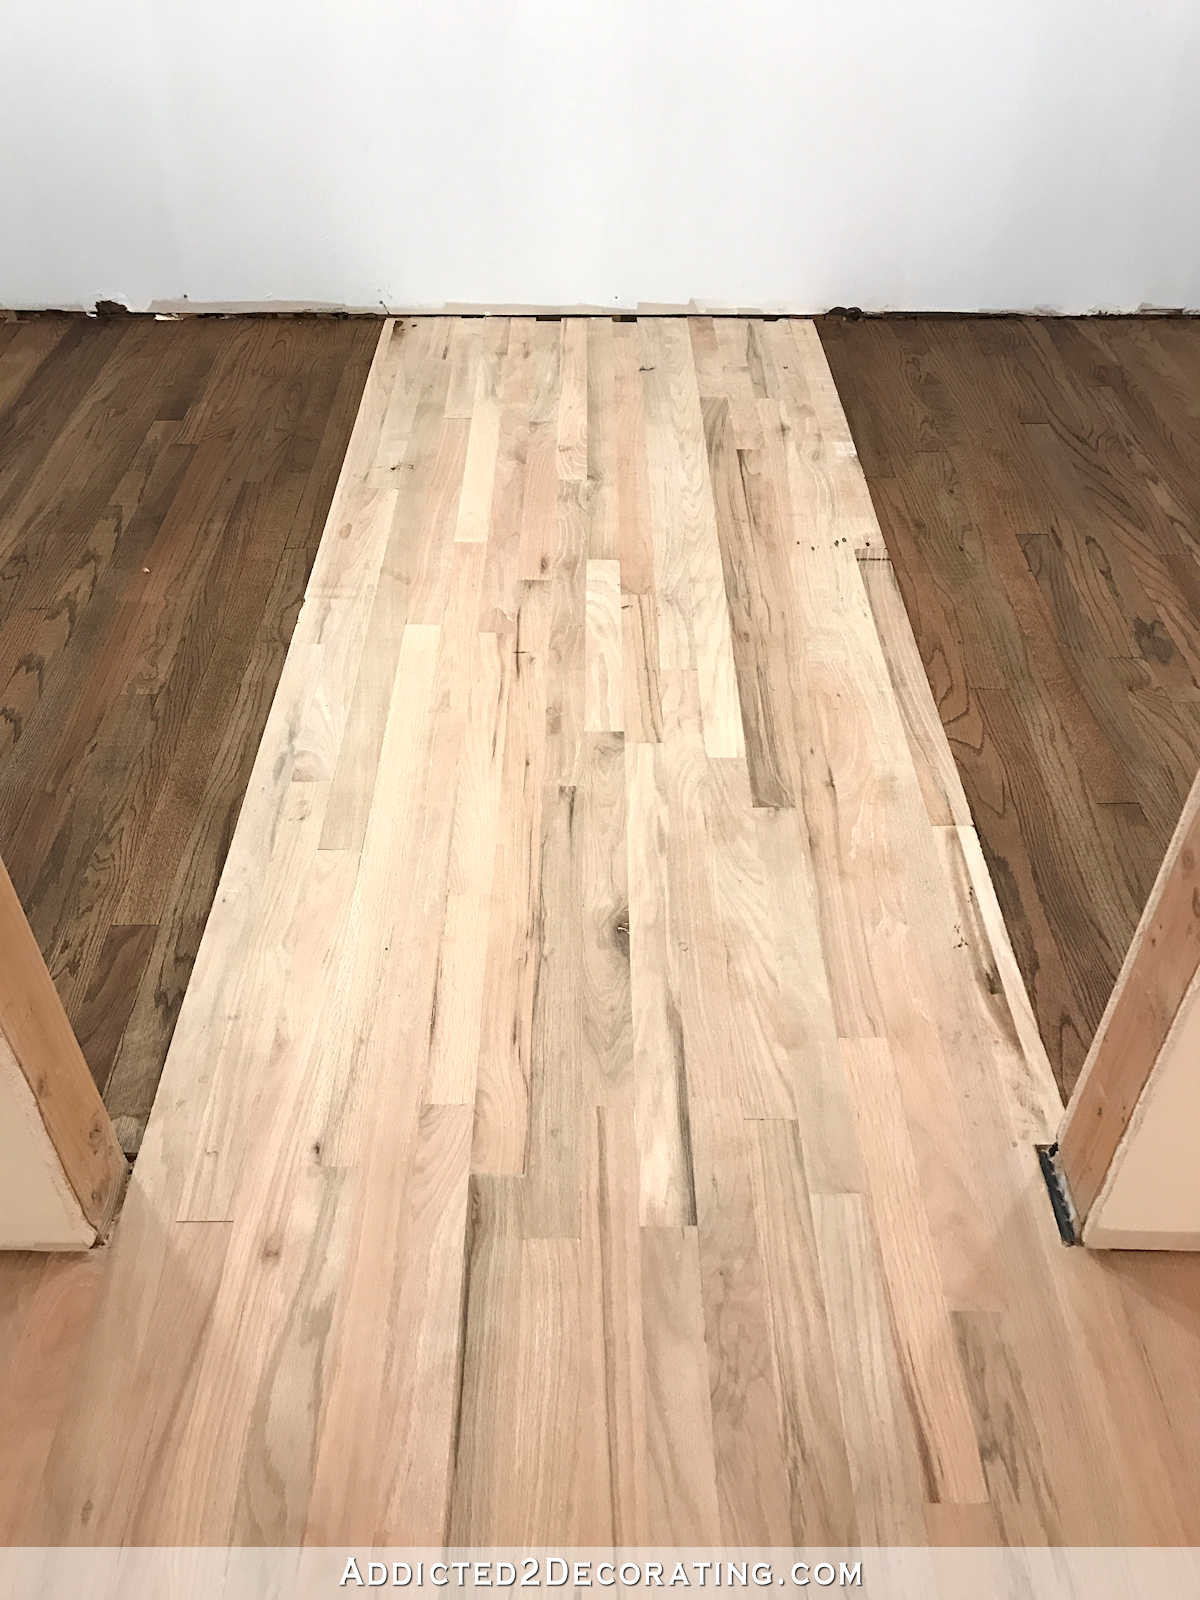 18 Stylish Minwax Hardwood Floor Cleaner 2024 free download minwax hardwood floor cleaner of adventures in staining my red oak hardwood floors products process inside staining red oak hardwood floors 11 stain on left and right sides of the